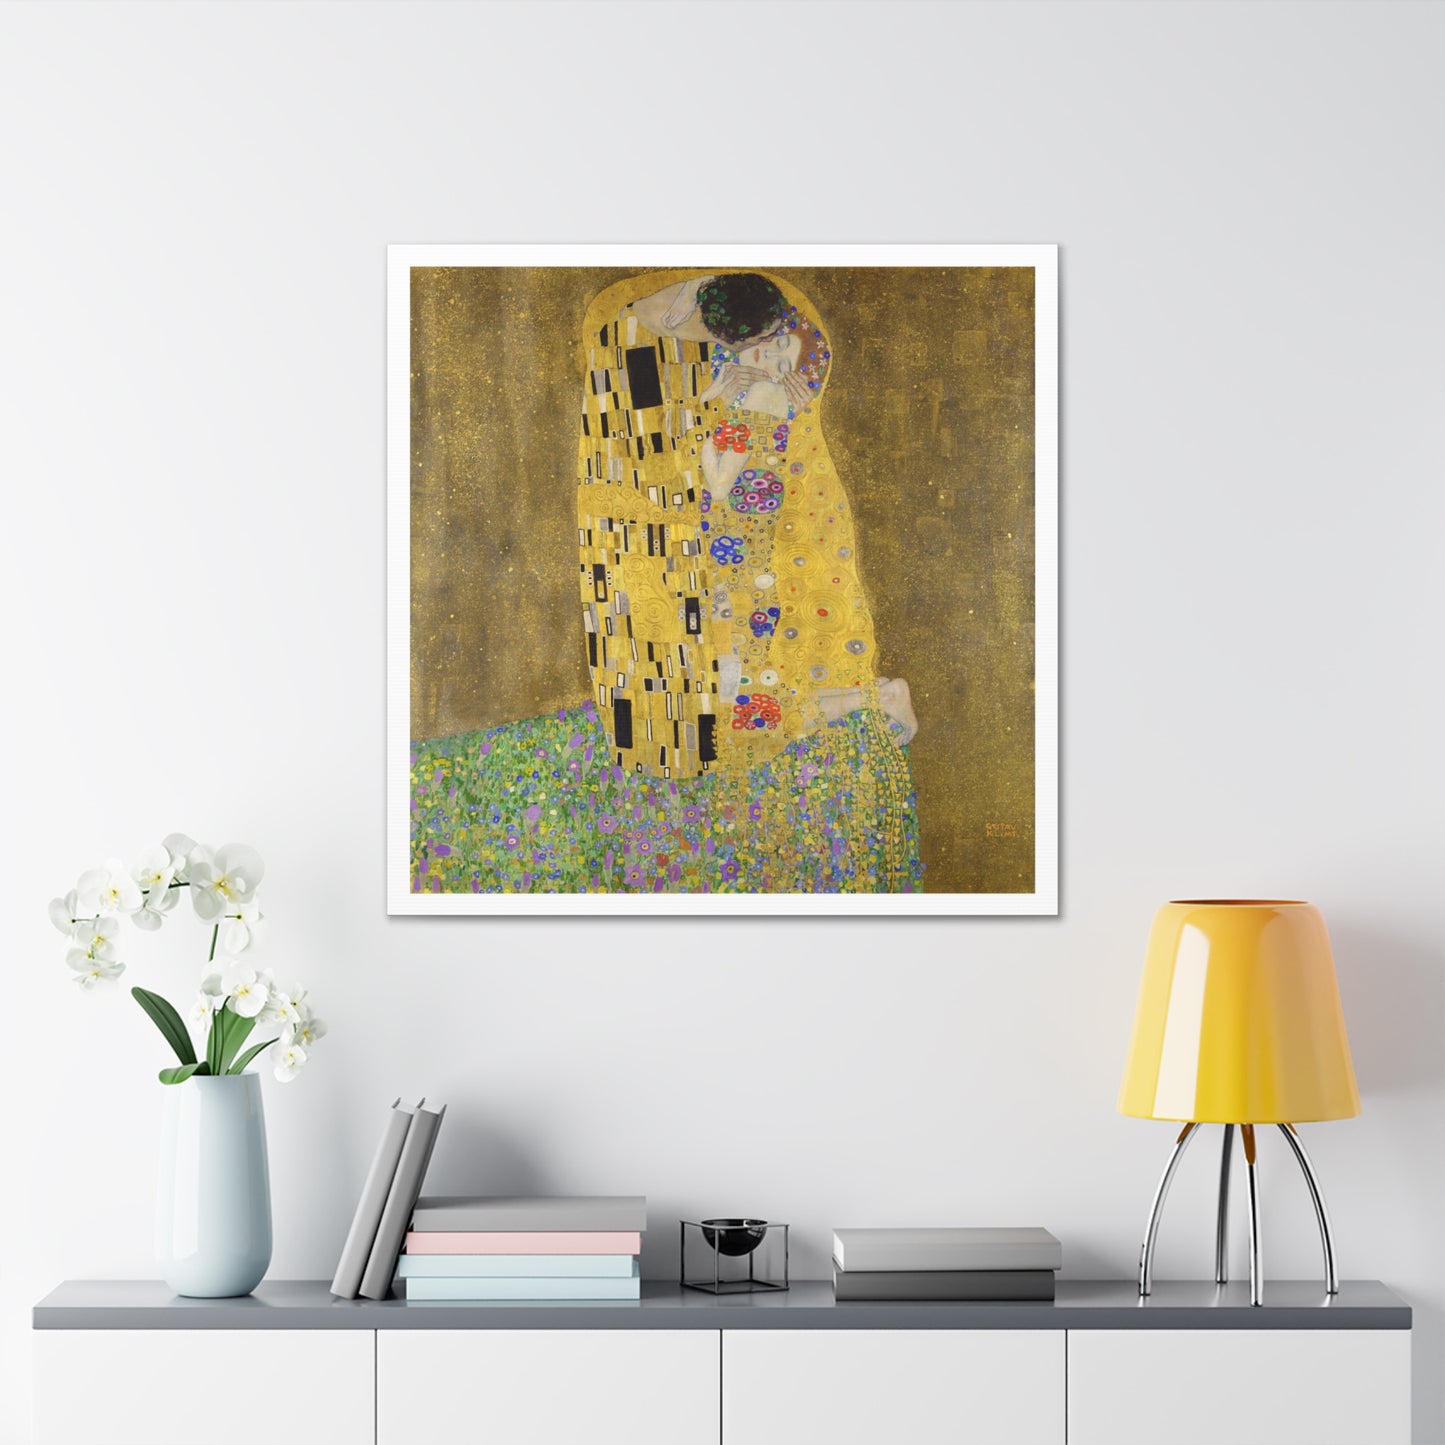 The Kiss (1907–1908) by Gustav Klimt, from the Original, Art Print on Canvas